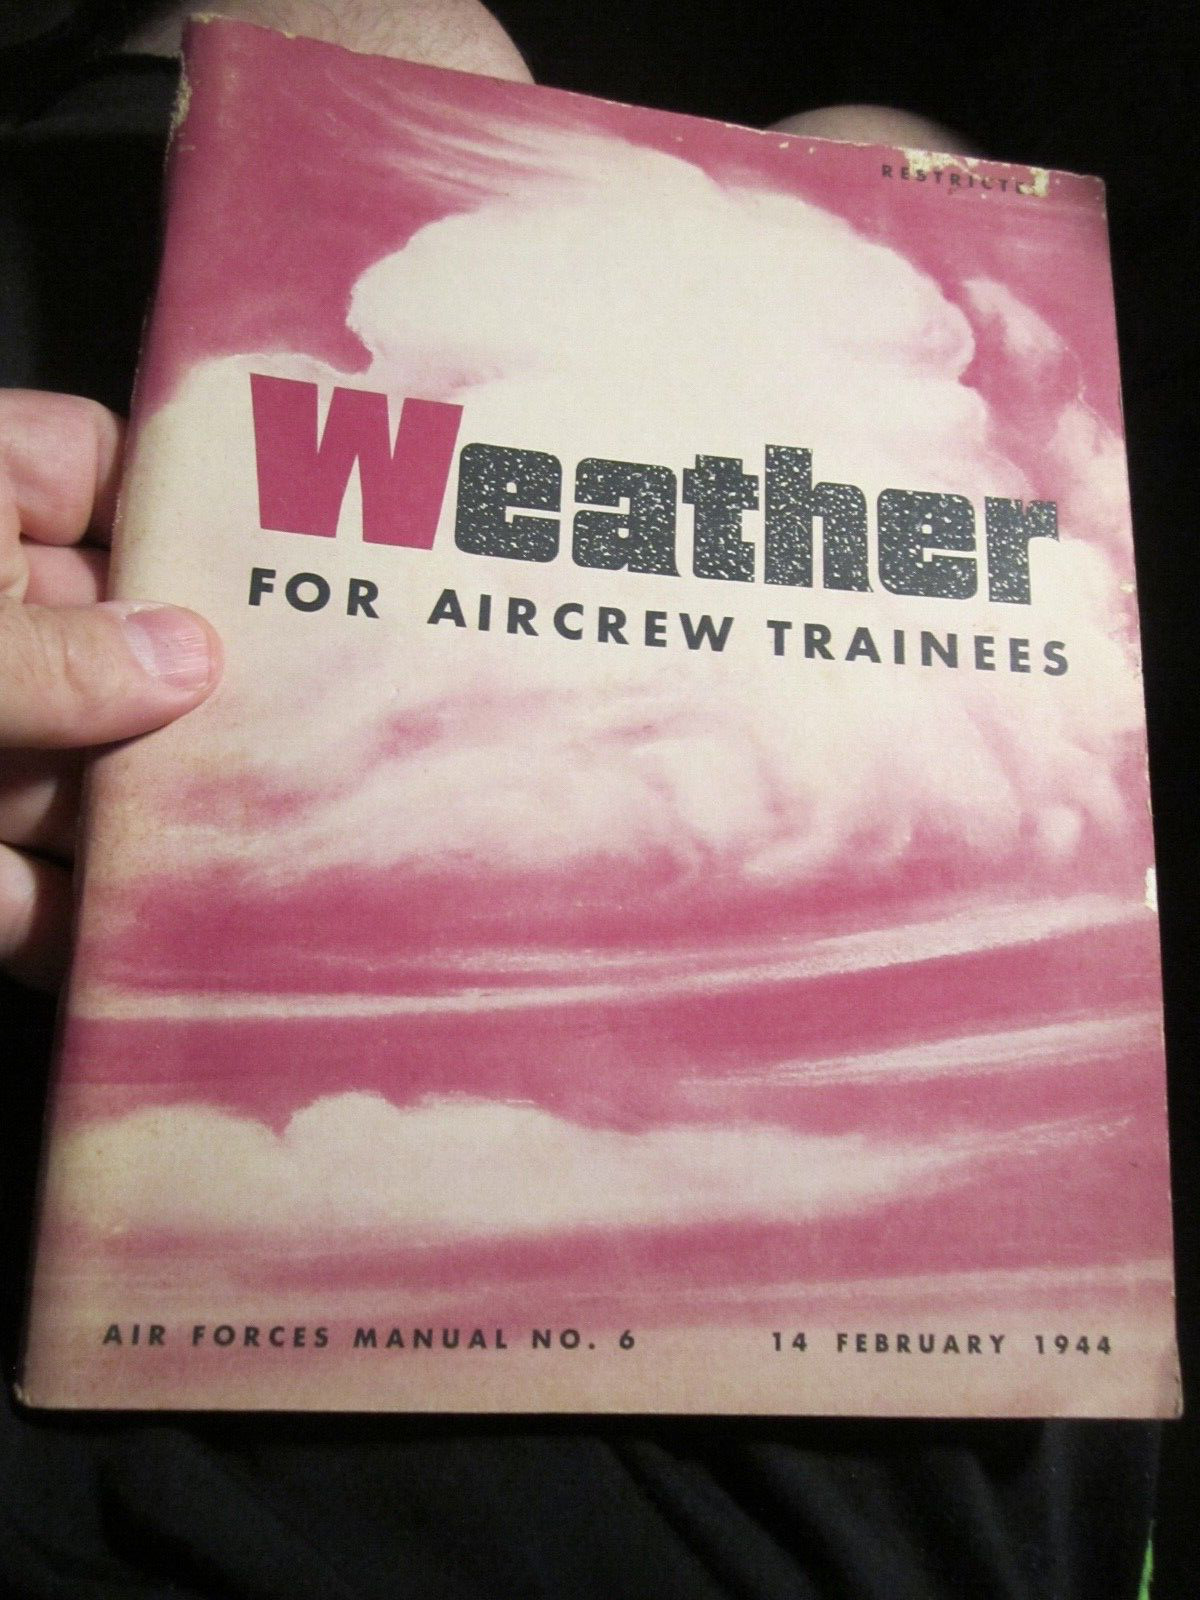 1944 WEATHER FOR AIRCREW TRAINEES BOOKLET AIR FORCES MANUAL NO. 6 -  BBA-11